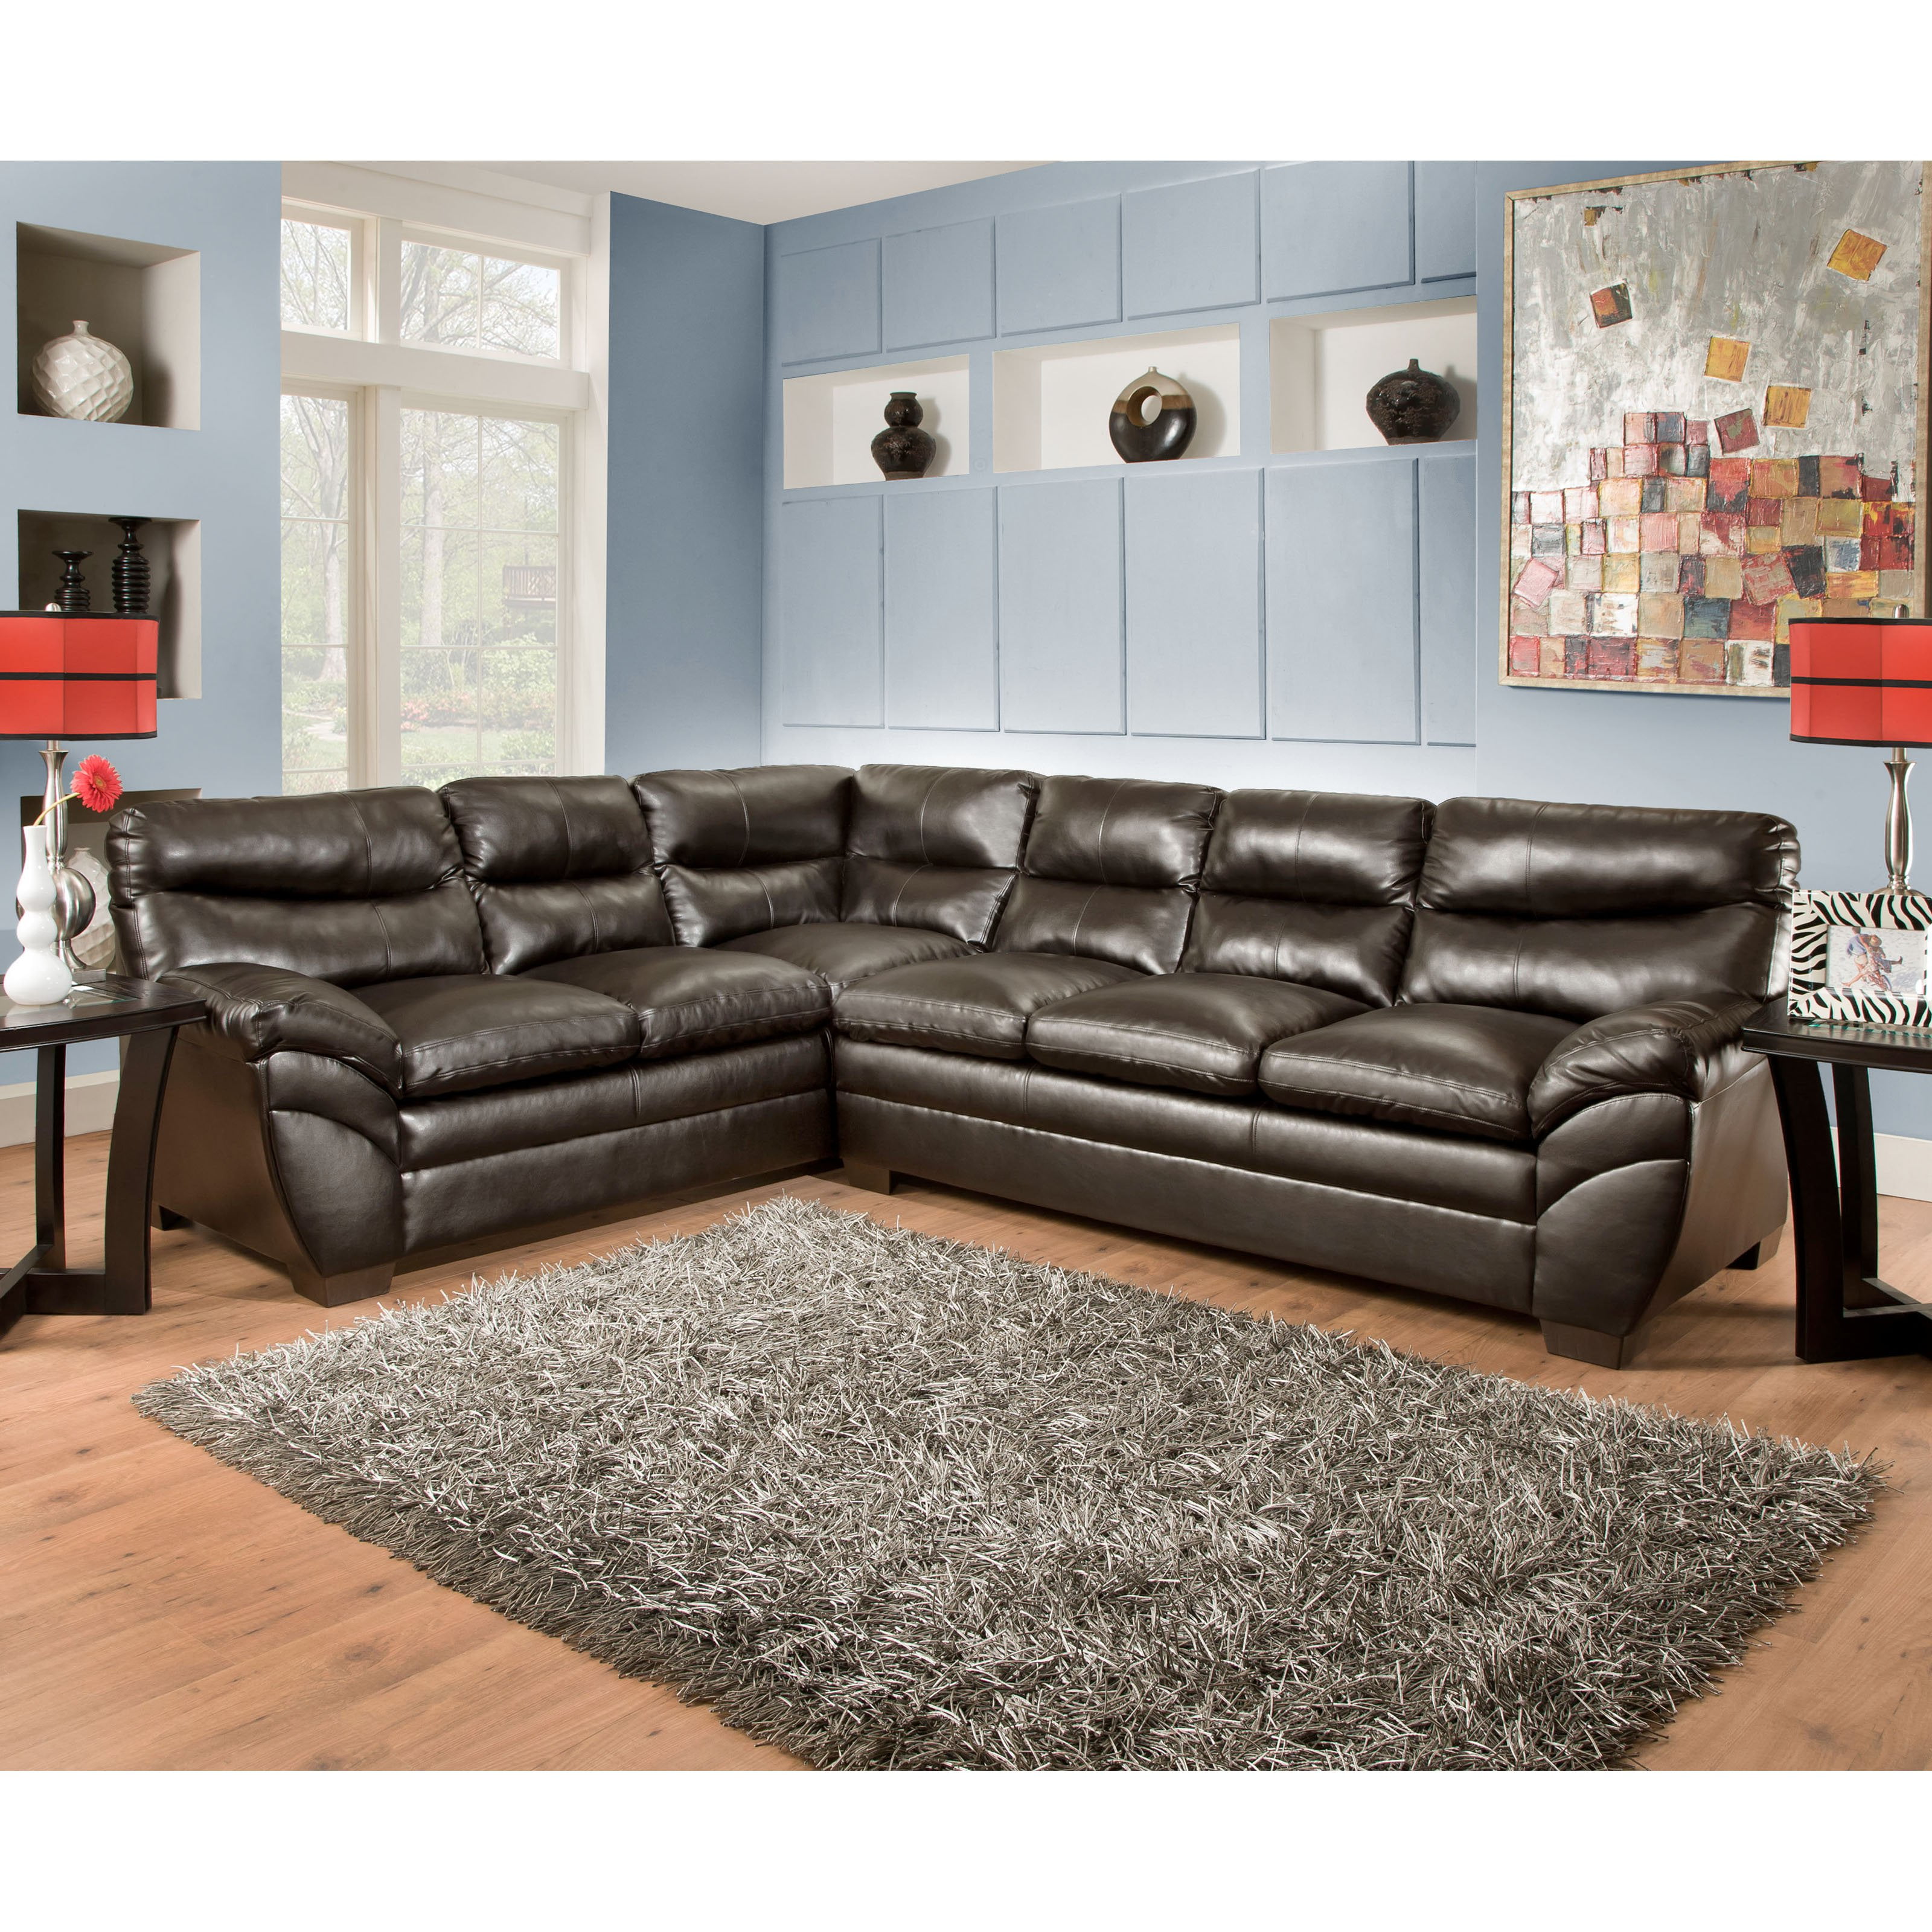 Simmons Soho Bonded Leather Sectional, Bonded Leather Sectionals